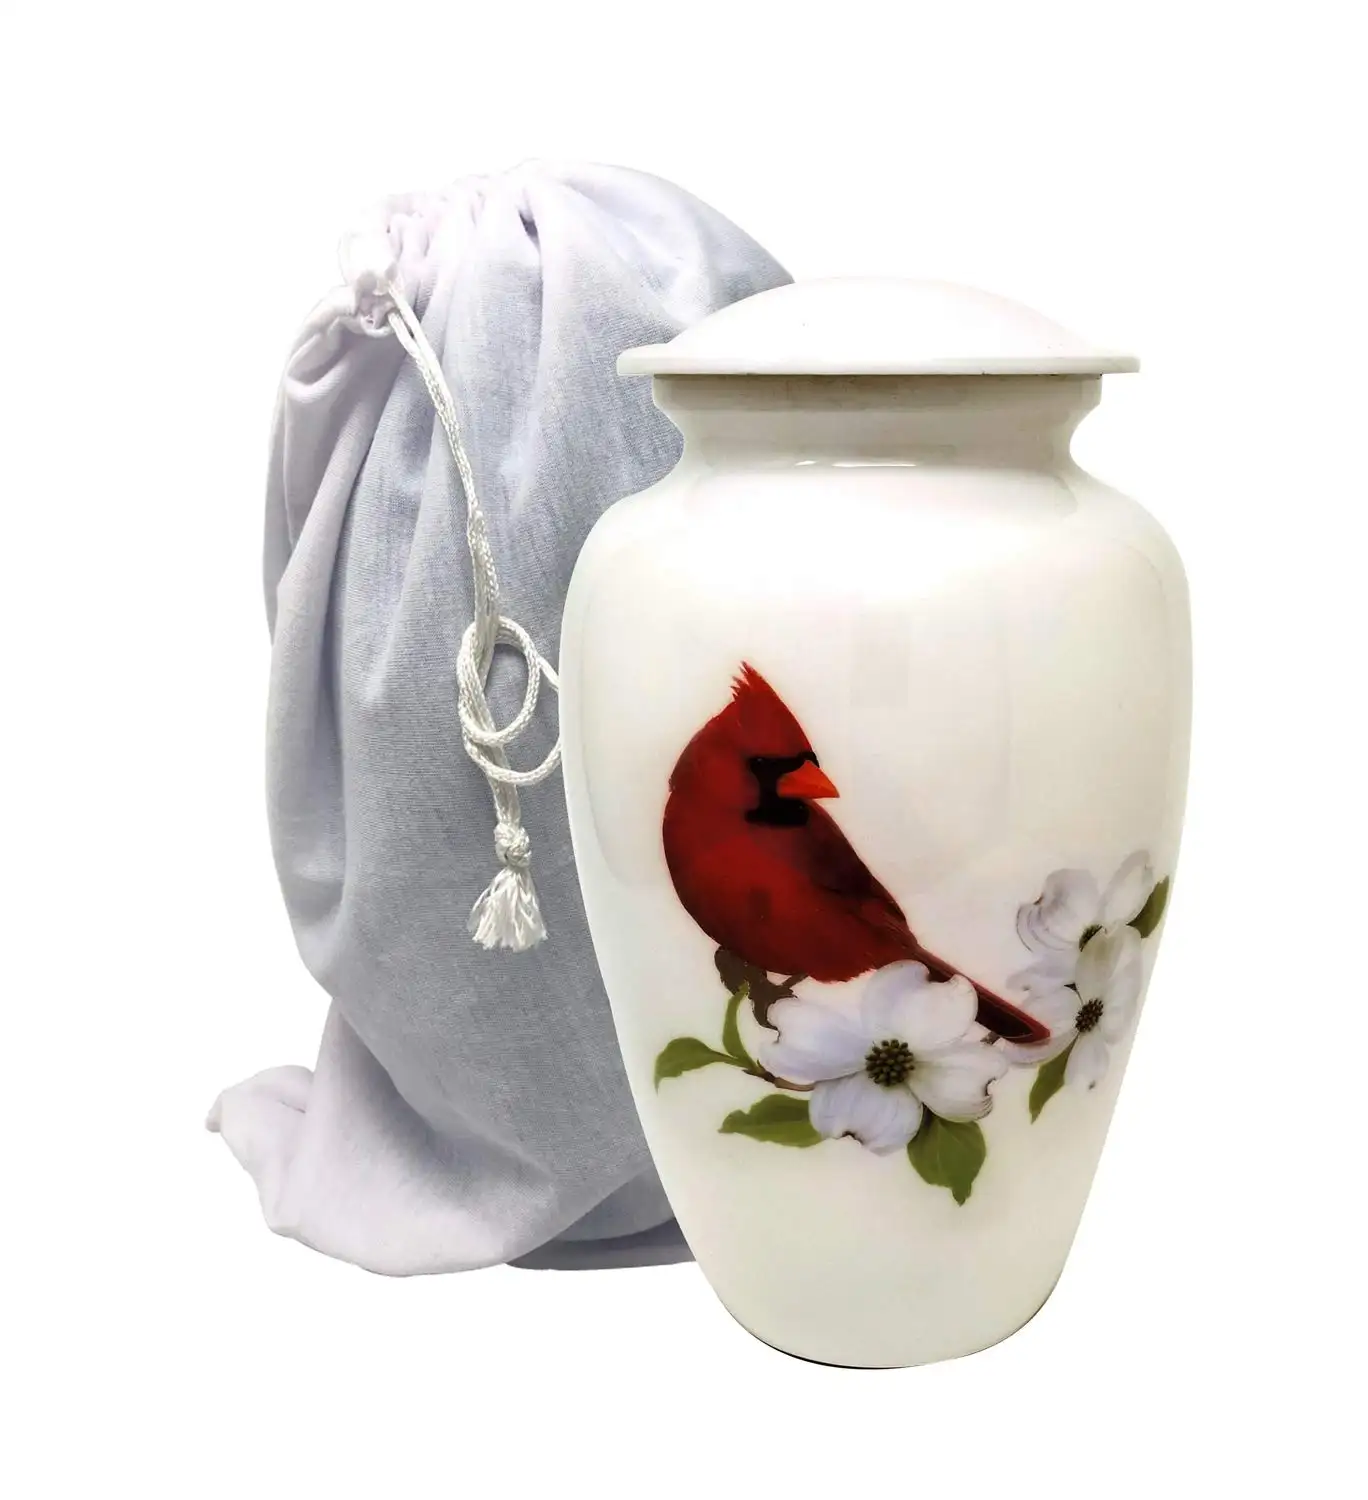 custom shaped ceramic white small round ash urn wholesales novelty funeral urn cremation pet urn with lid